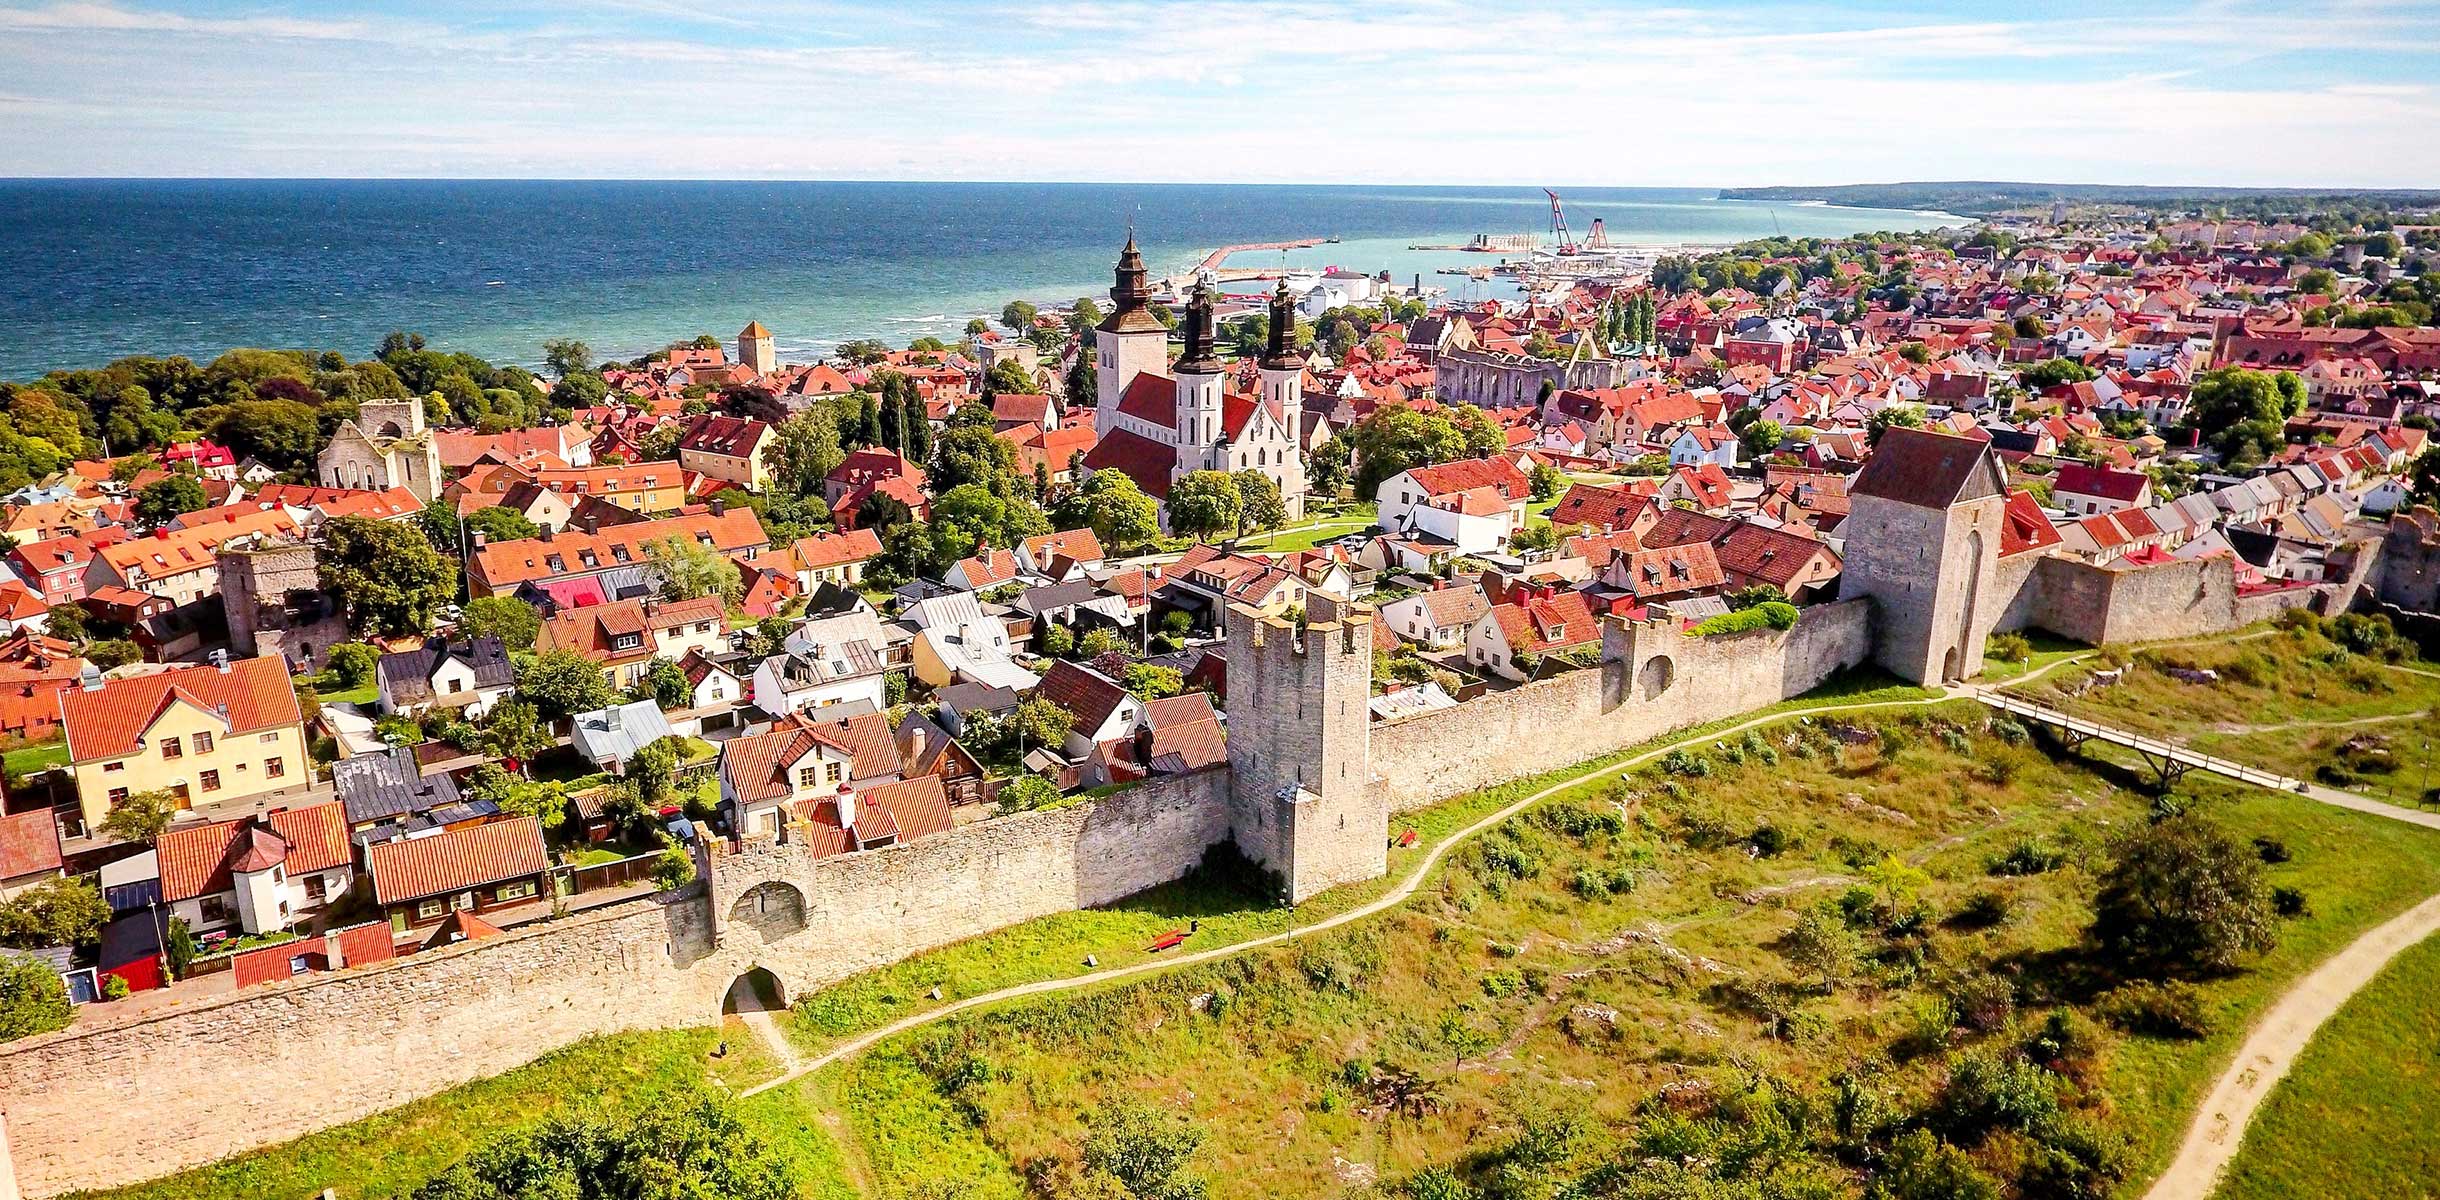 Medieval wall around Visby, Sweden